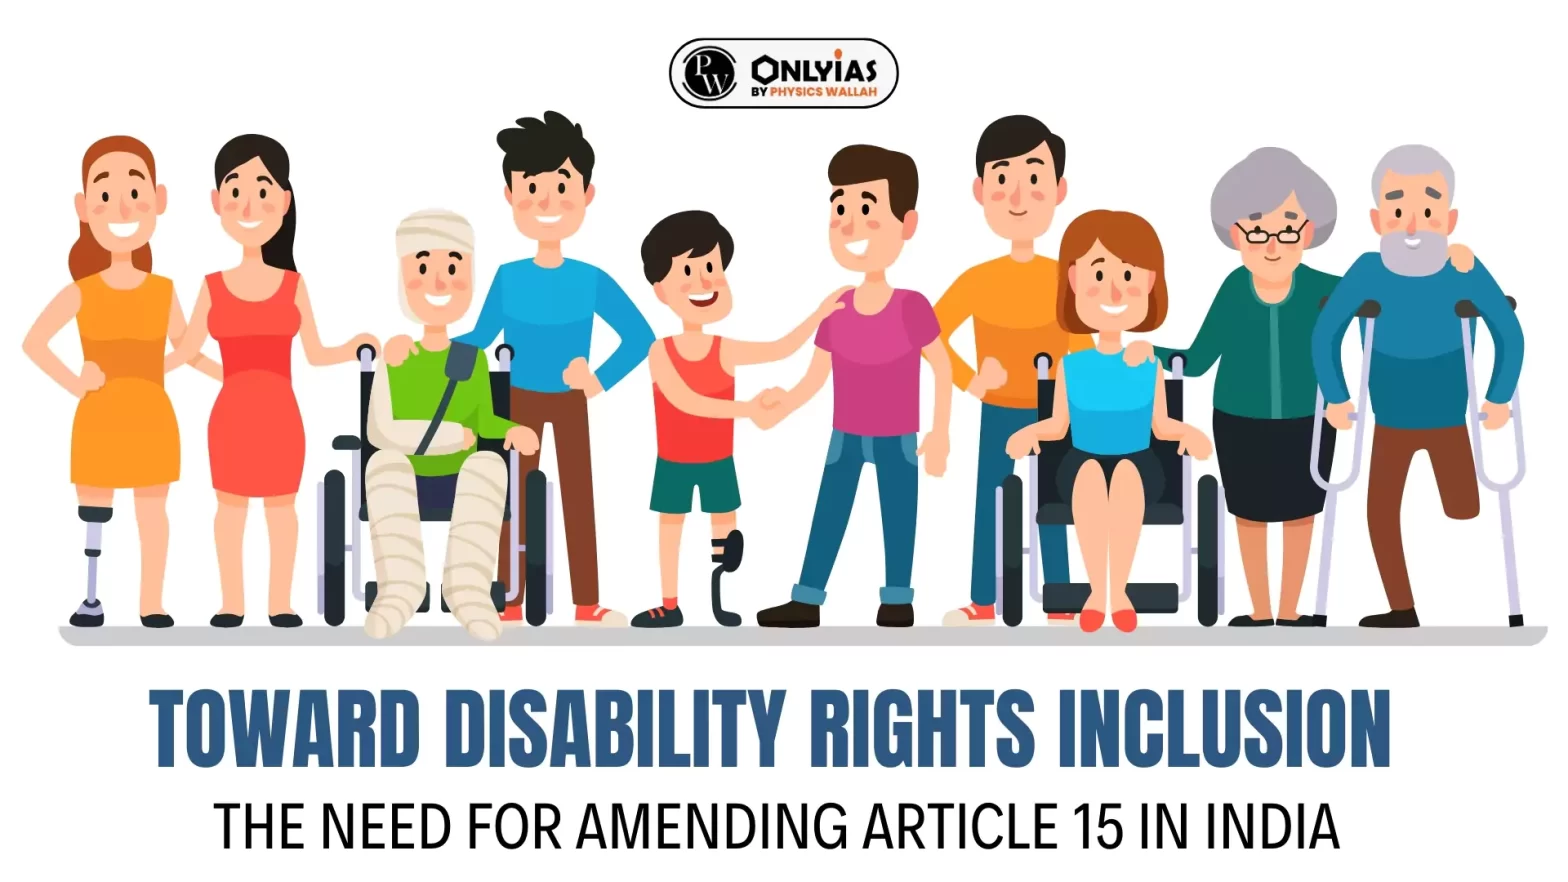 Toward Disability Rights Inclusion: The Need for Amending Article 15 in India